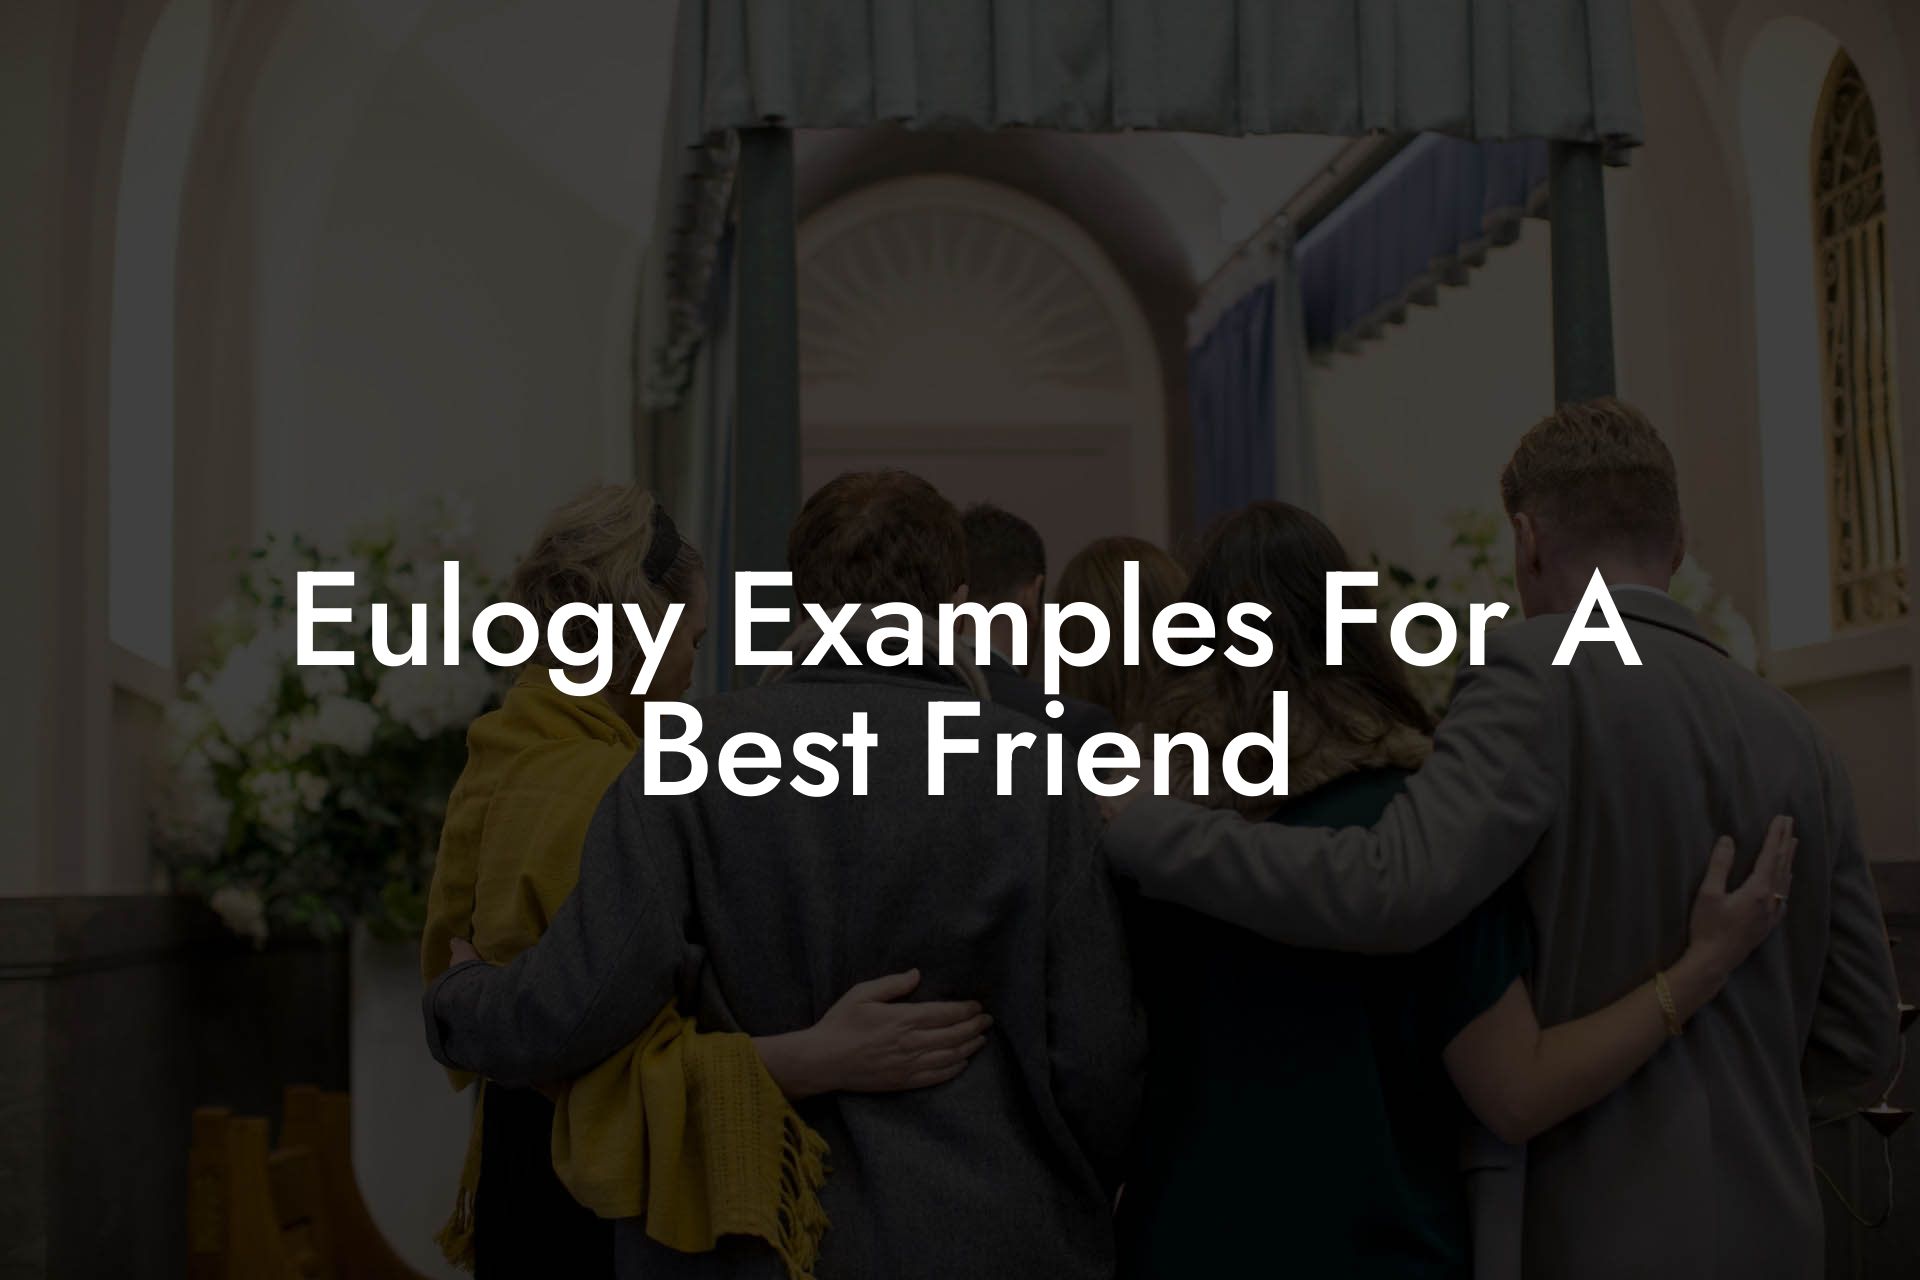 Eulogy Examples For A Best Friend